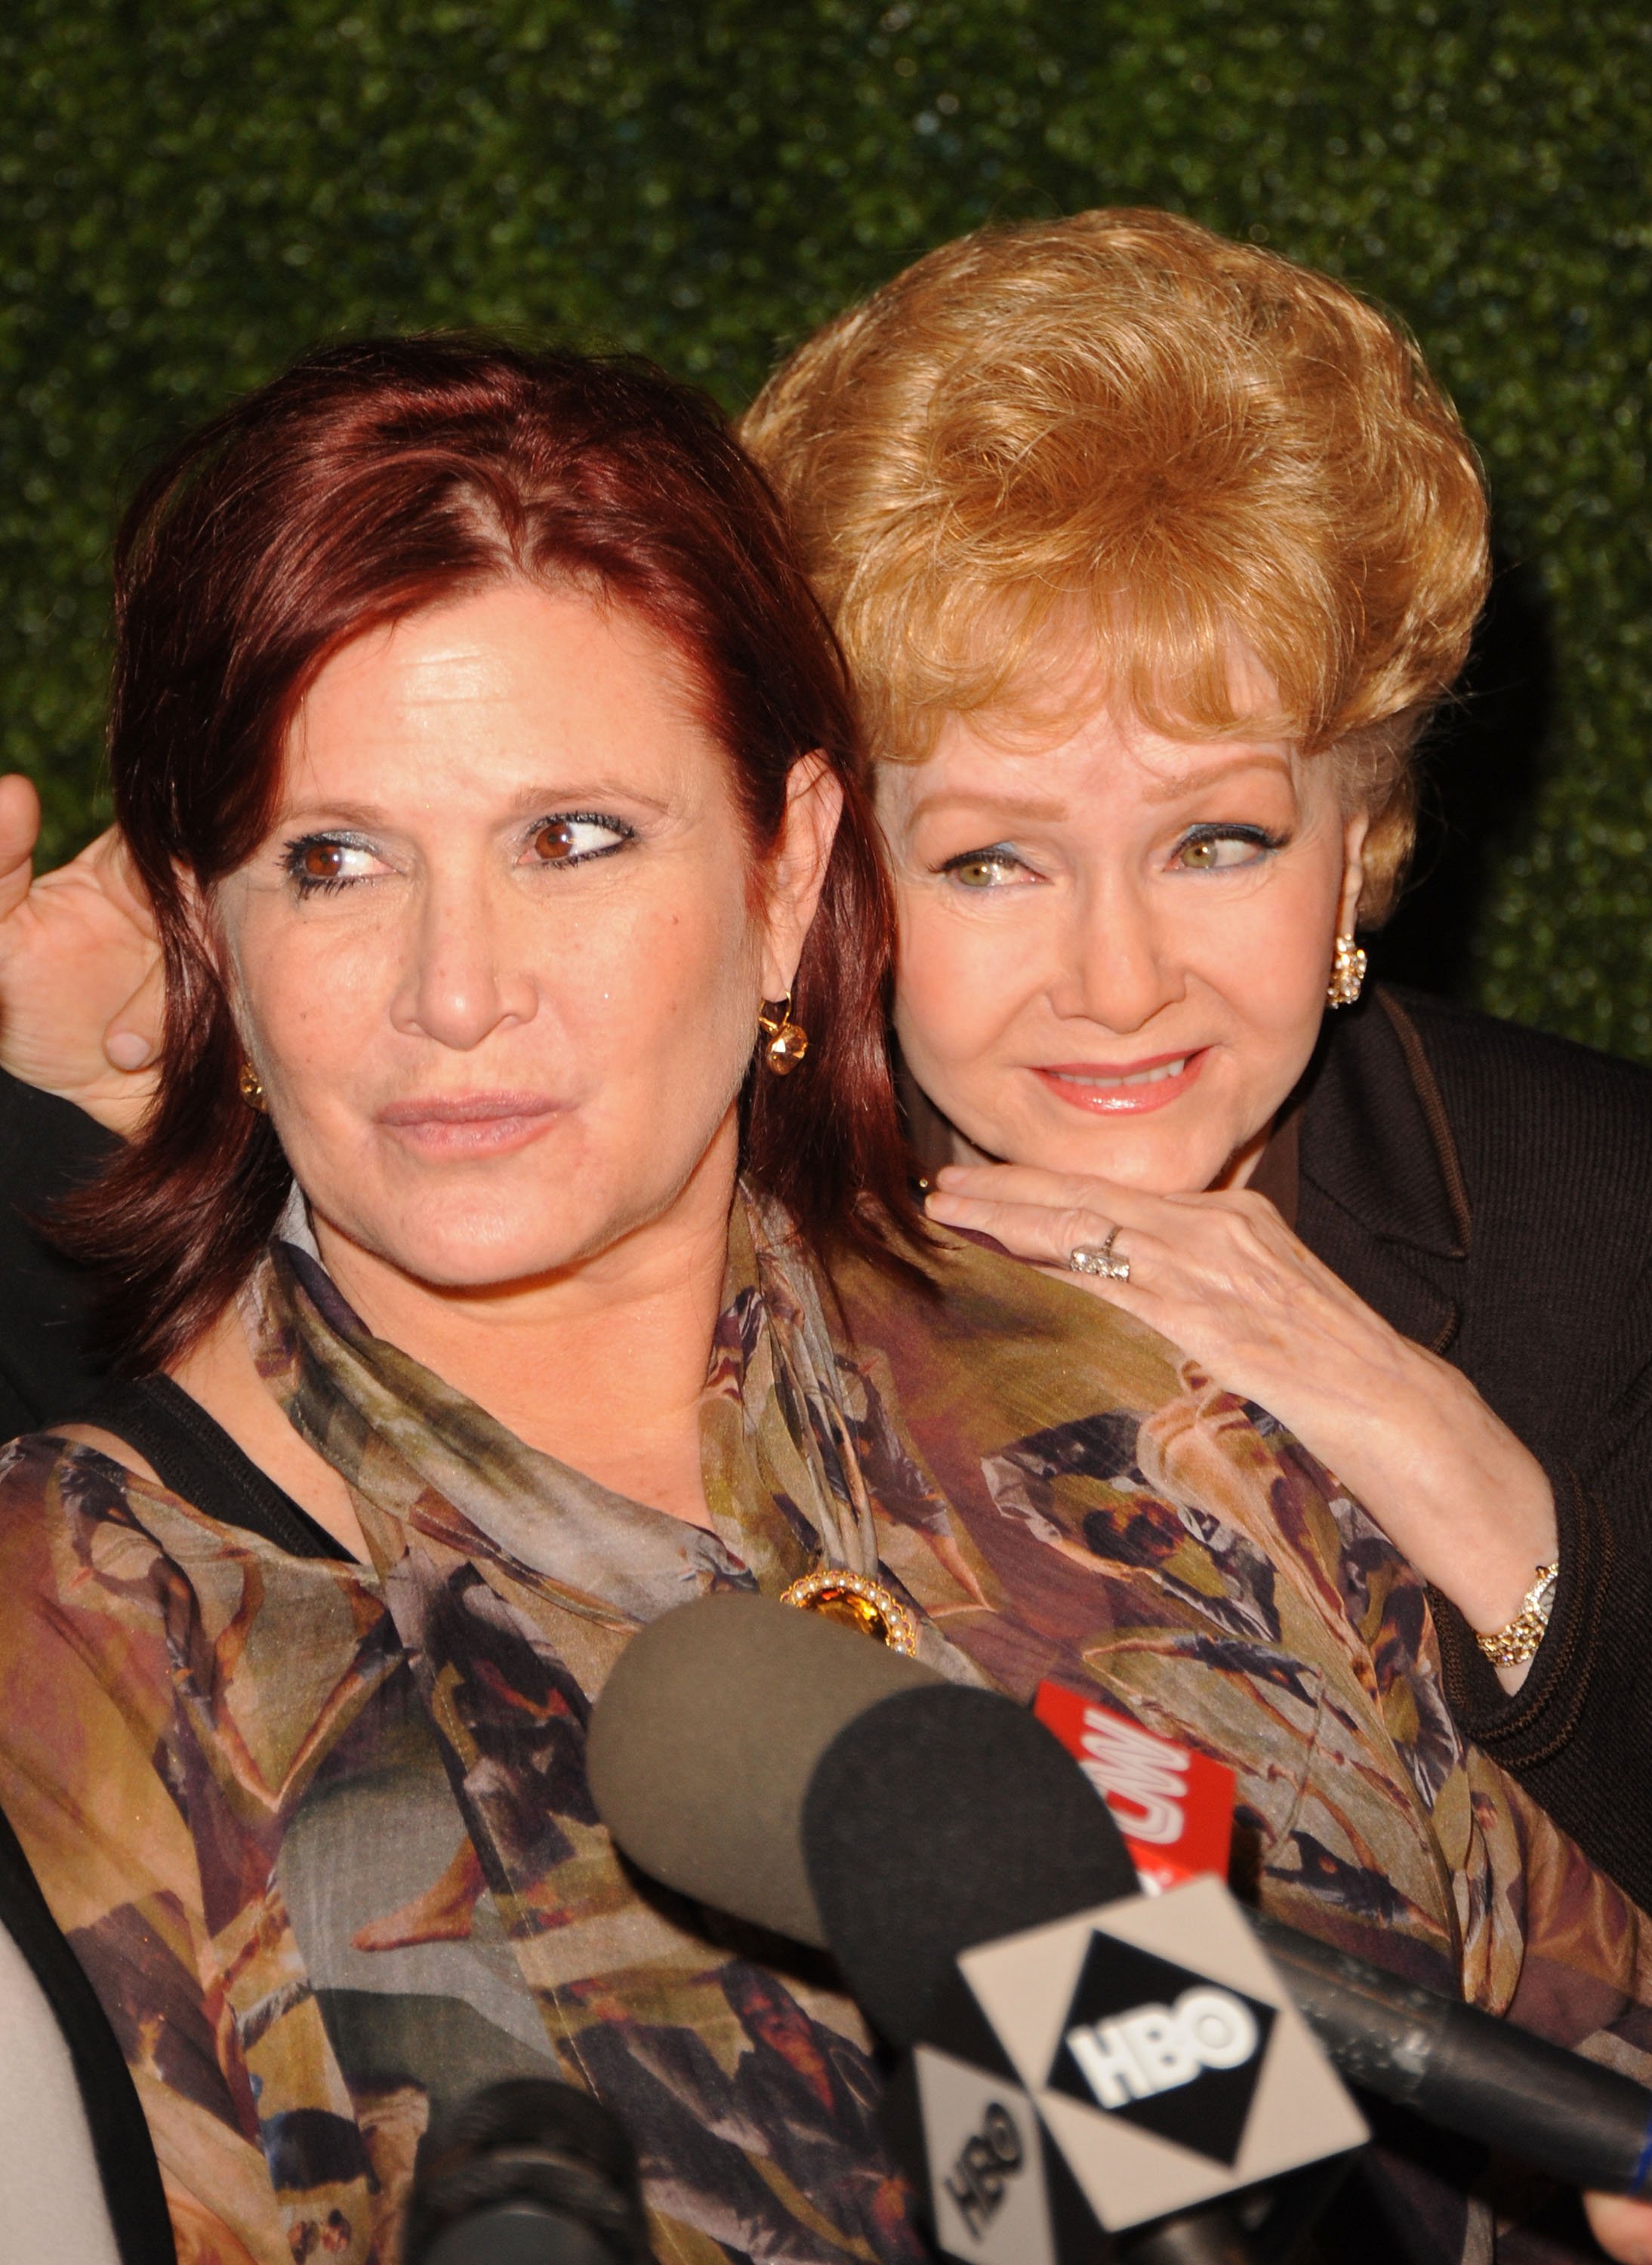 Actresses Carrie Fisher and Debbie Reynolds arrive at the HBO premiere of "Wishful Drinking" held at the Linwood Dunn Theater at the Pickford Center for Motion Study on December 7, 2010 in Hollywood, California. | Source: Getty Images